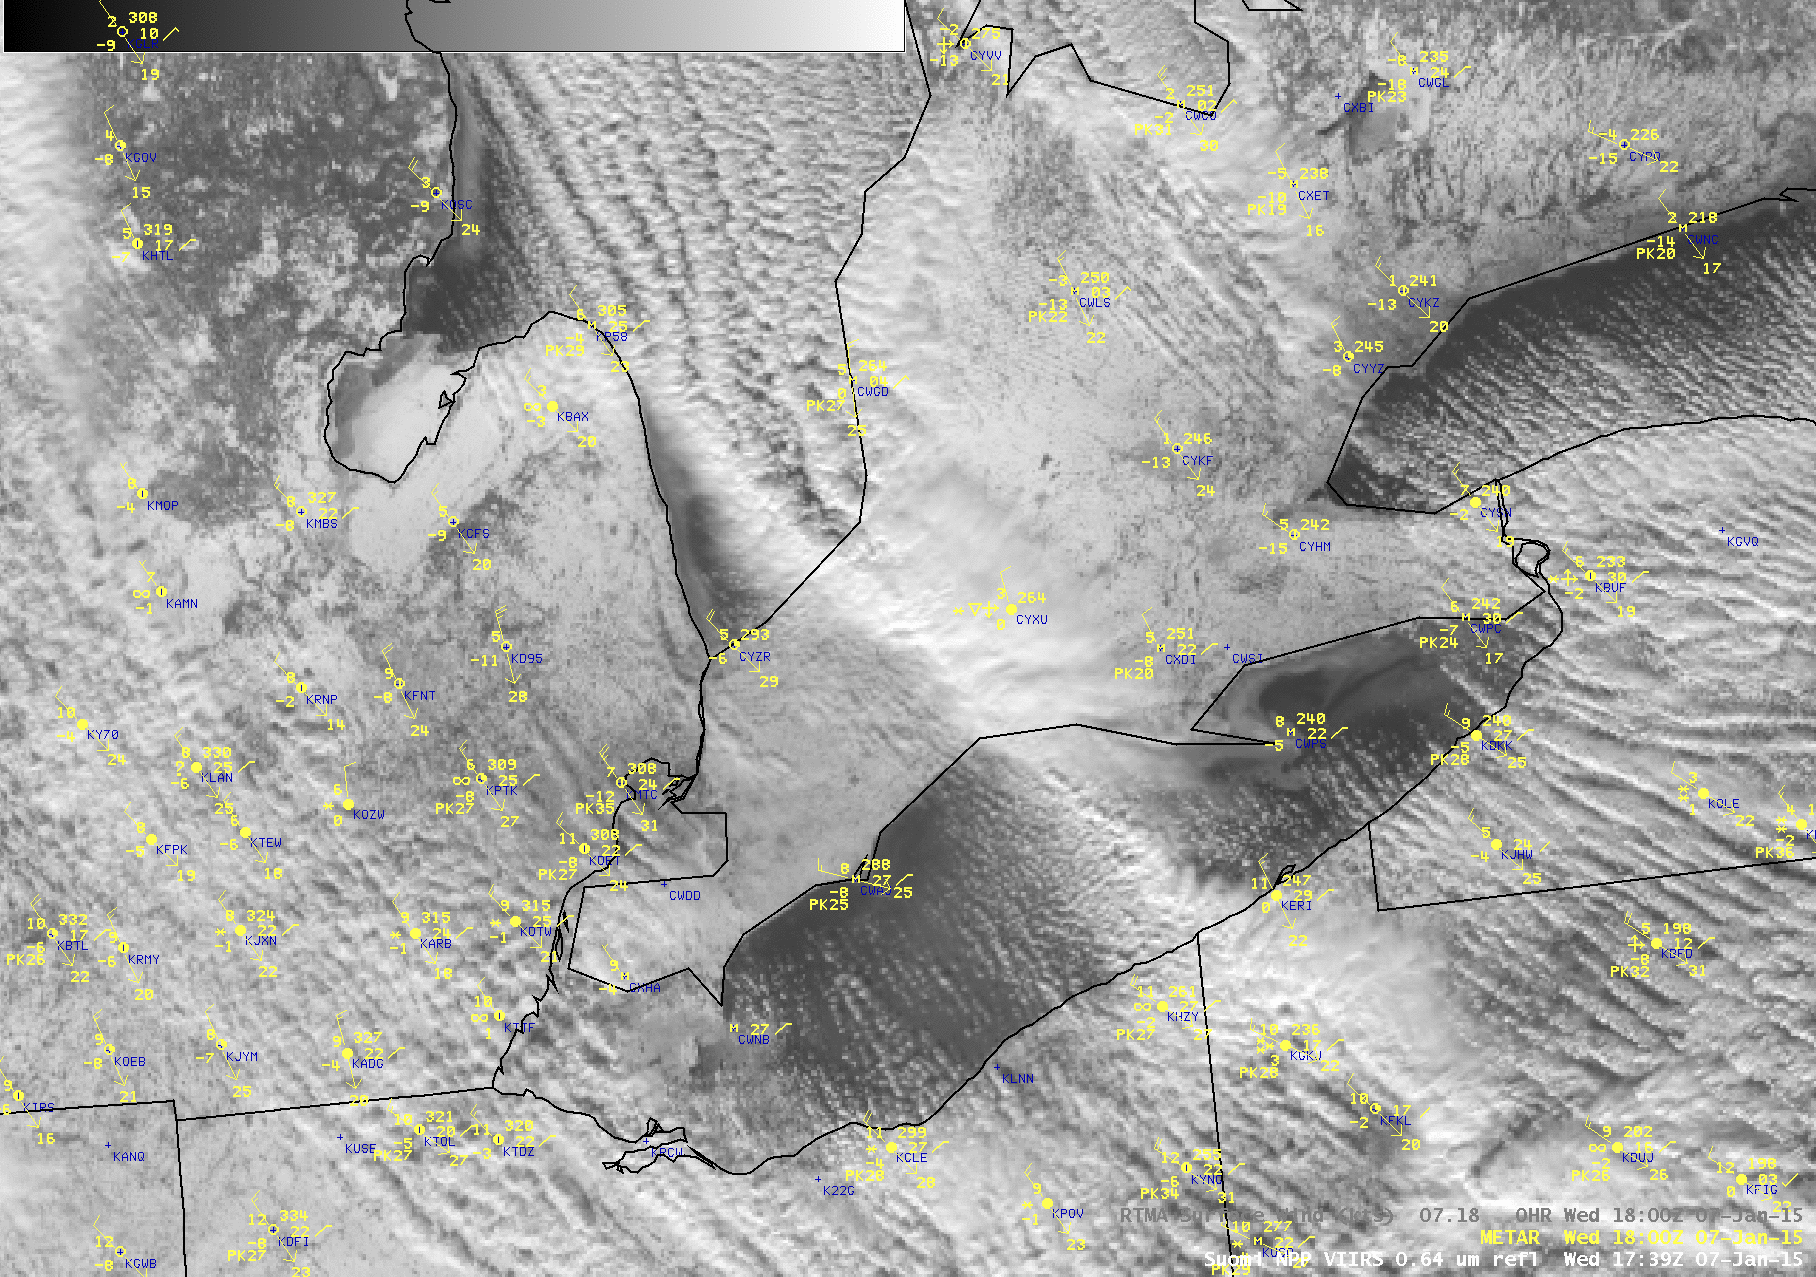 Suomi NPP VIIRS 0.64 µm visible image, with surface METARs, RTMA winds, and frontal boundaries